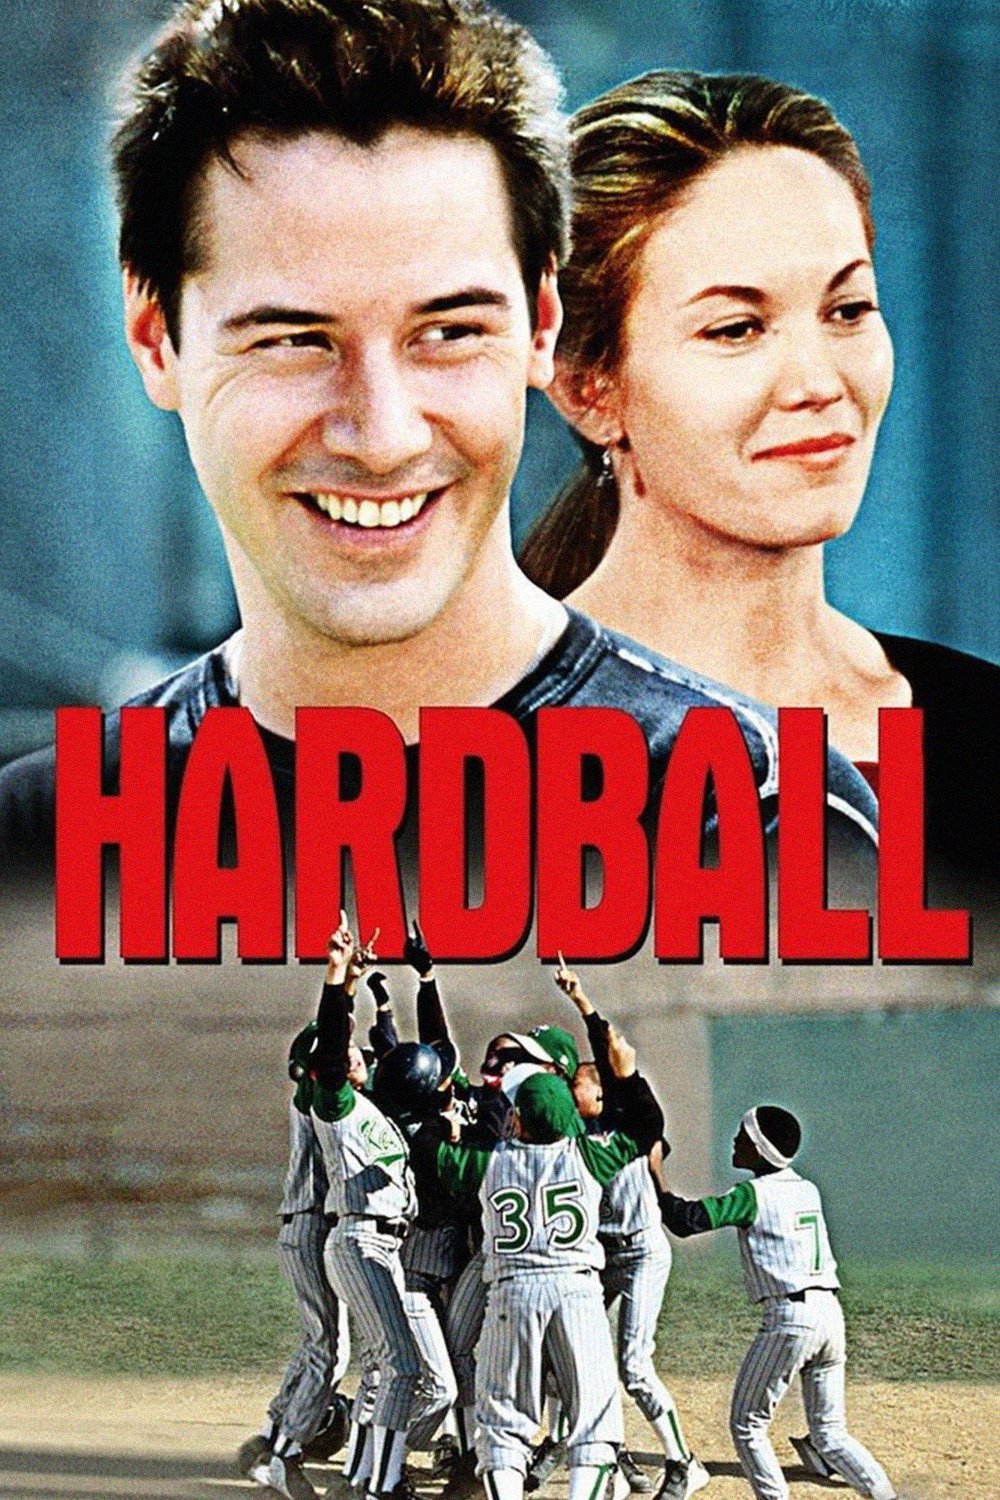 Poster for the movie "Hardball"